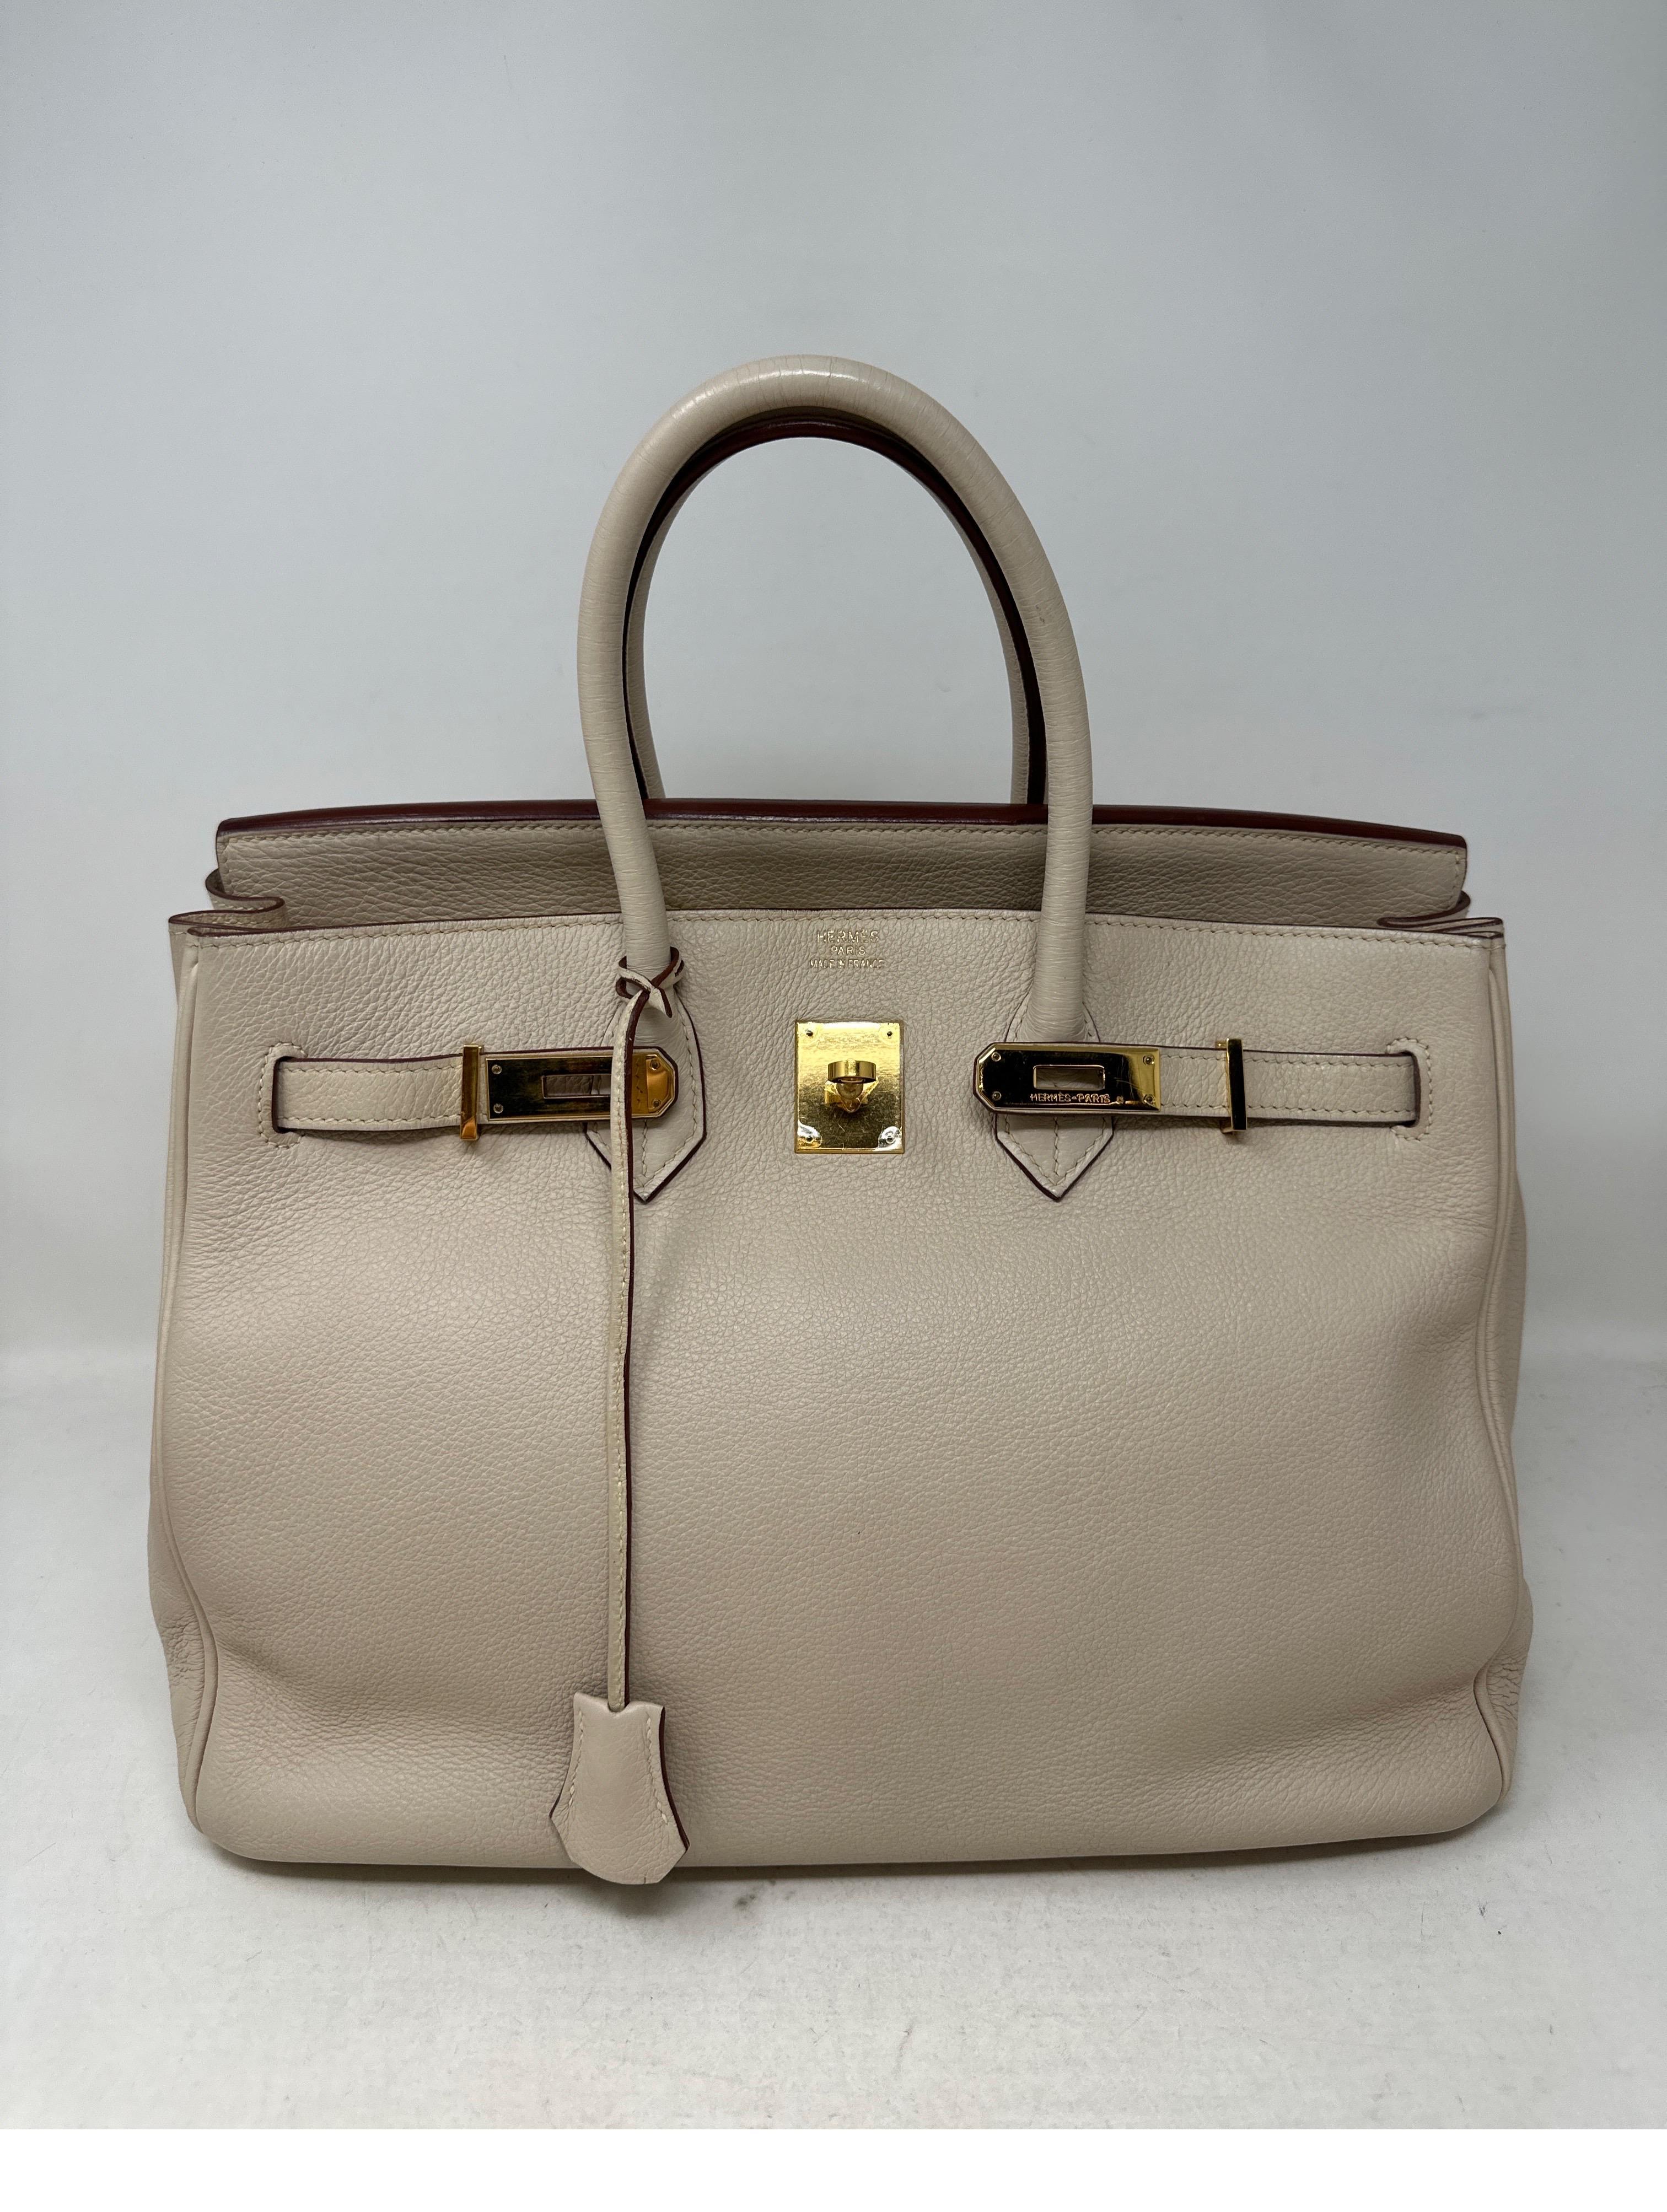 Hermes Parchemin Birkin 35 Bag. Cream color with gold hardware. Interior clean. Good condition. Great neutral color. Rare combination. Priced to sell. Includes clochette, lock ,keys, and dust bag. Guaranteed authentic. 